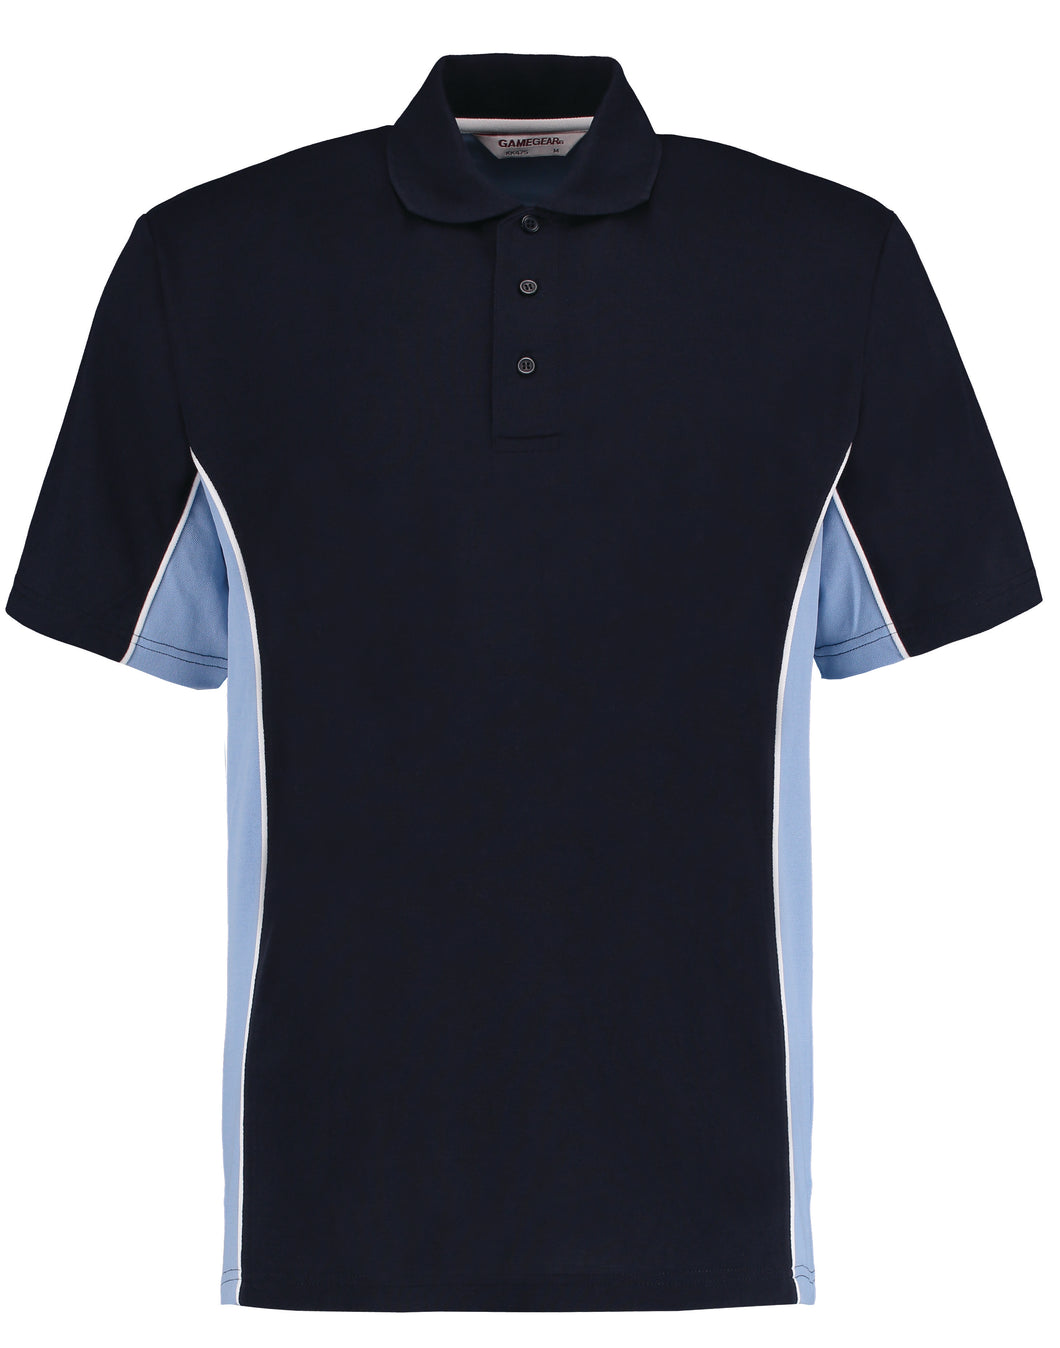 Polo navy colourways available in 5 colours